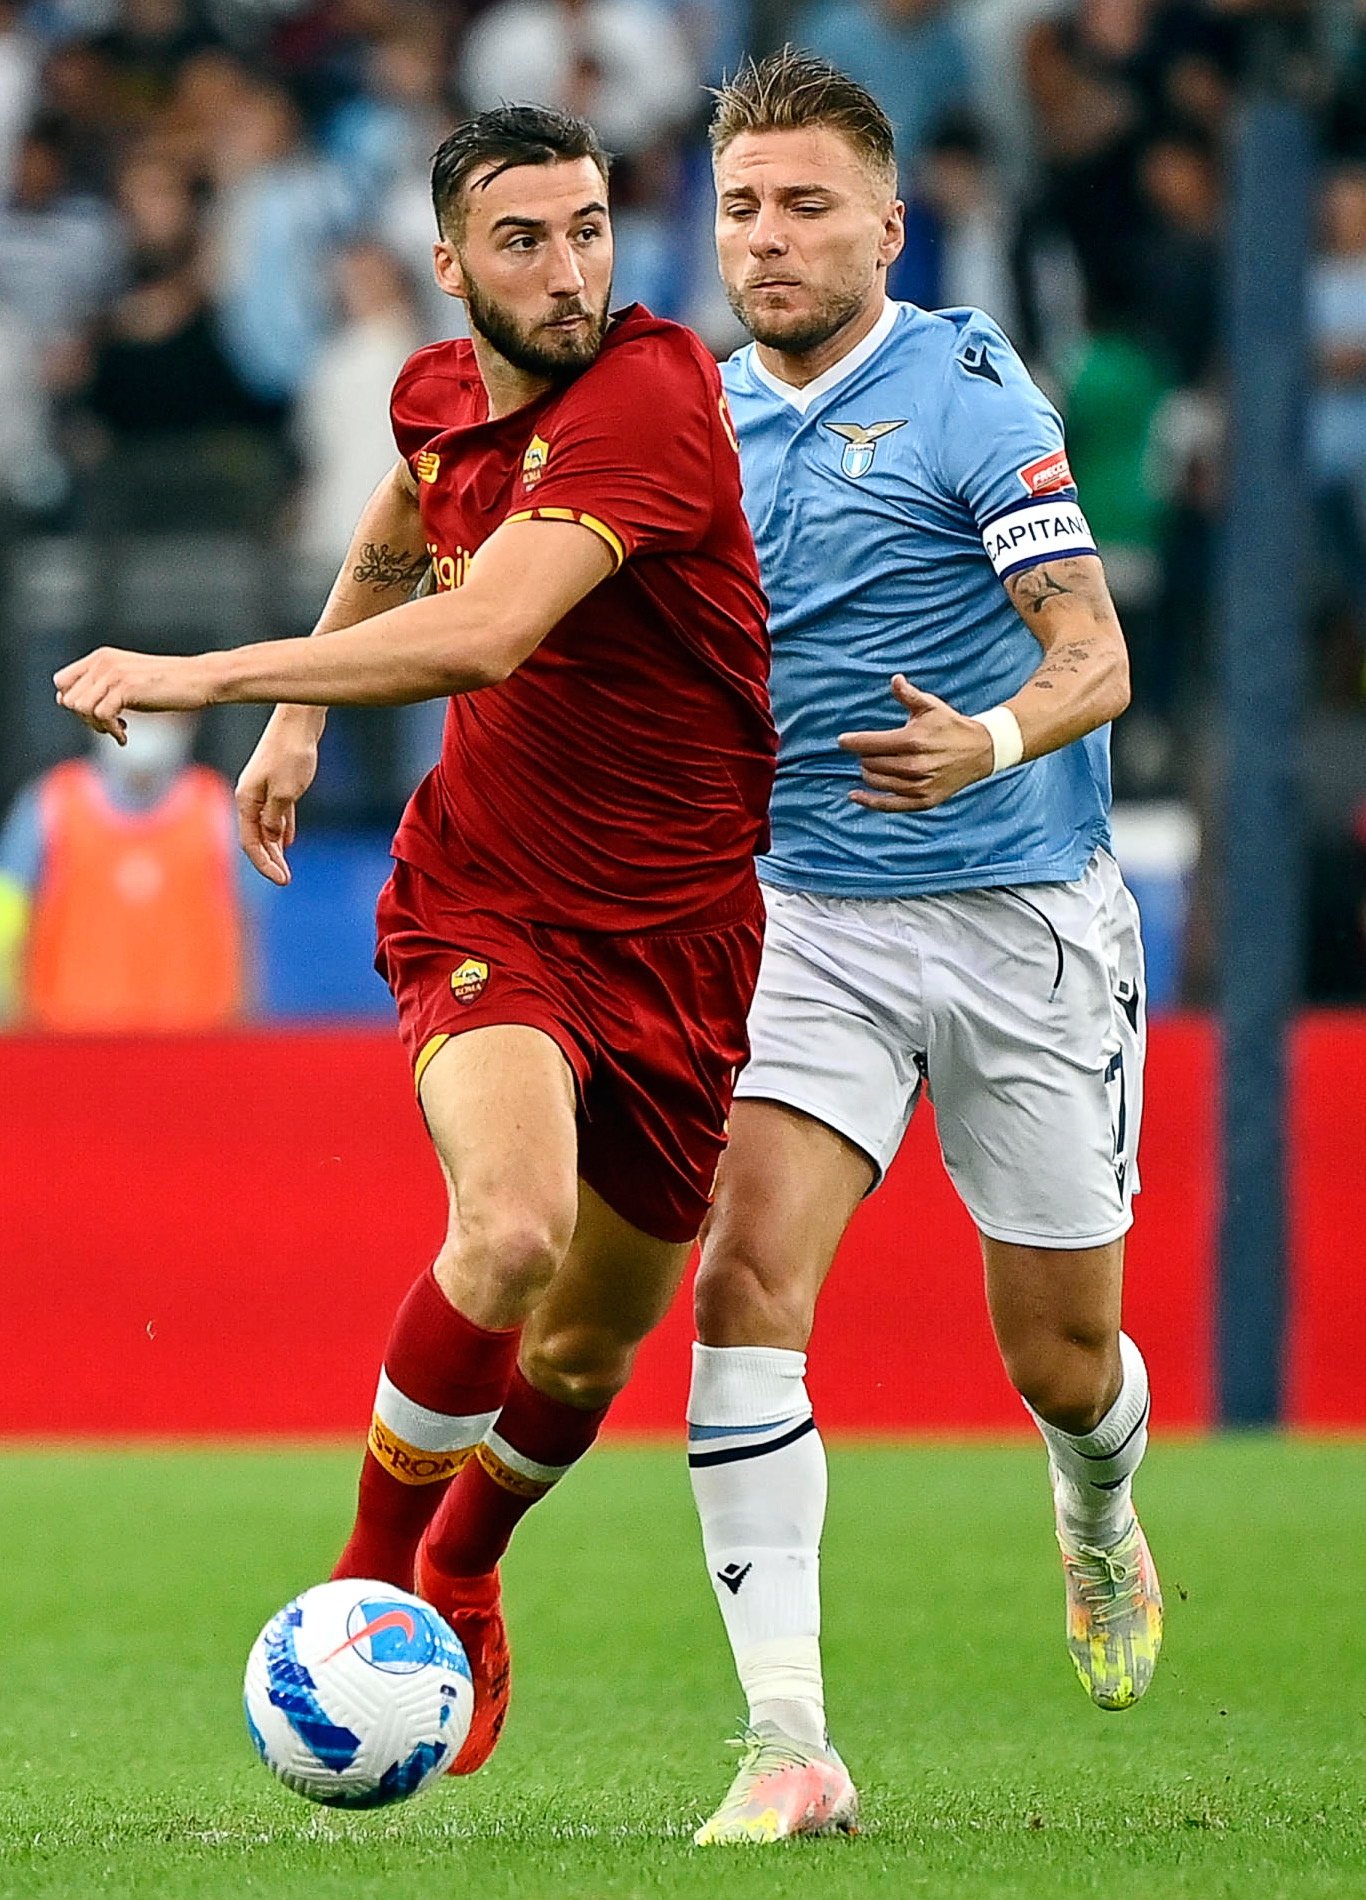 Roma's Bryan Cristante (L) in action against Lazio's Ciro Immobile (R) during a Serie A match at the Stadio Olimpico in Rome, Italy, Sept. 26, 2021. (EPA Photo)